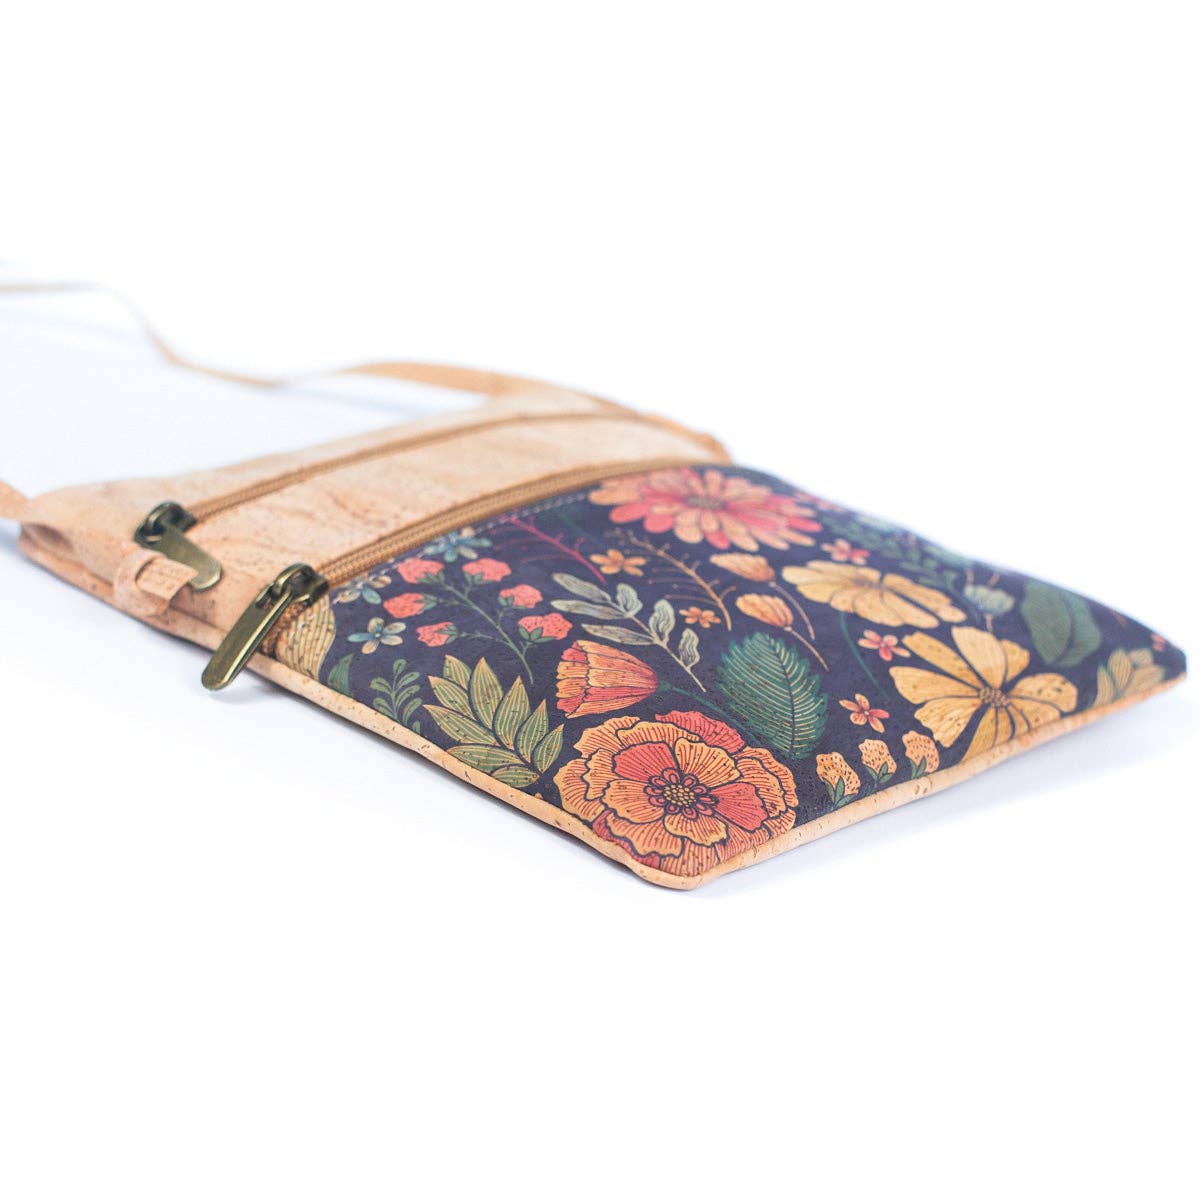 Angelco Accessories - Triple section crossbody bag - black floral, low angle view on white flatlay